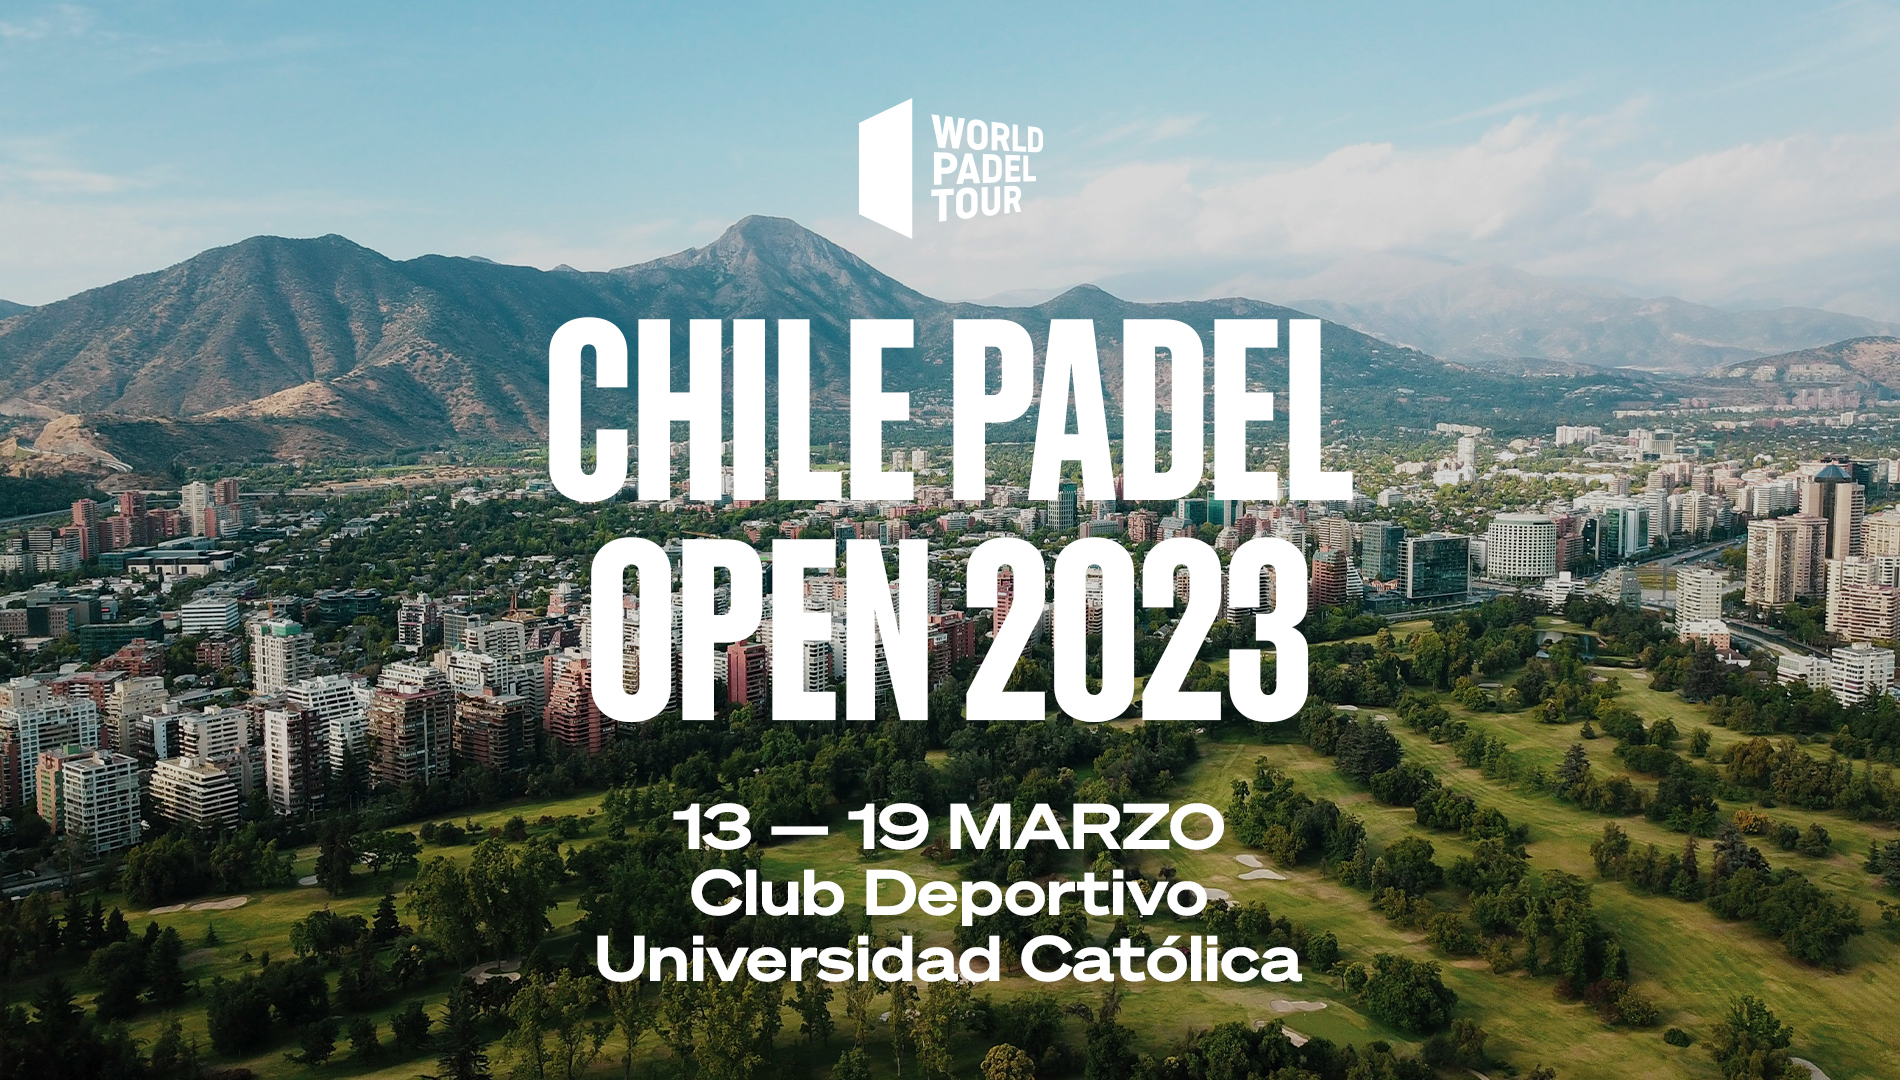 Chile to host World Padel Tour for the first time in 2023!